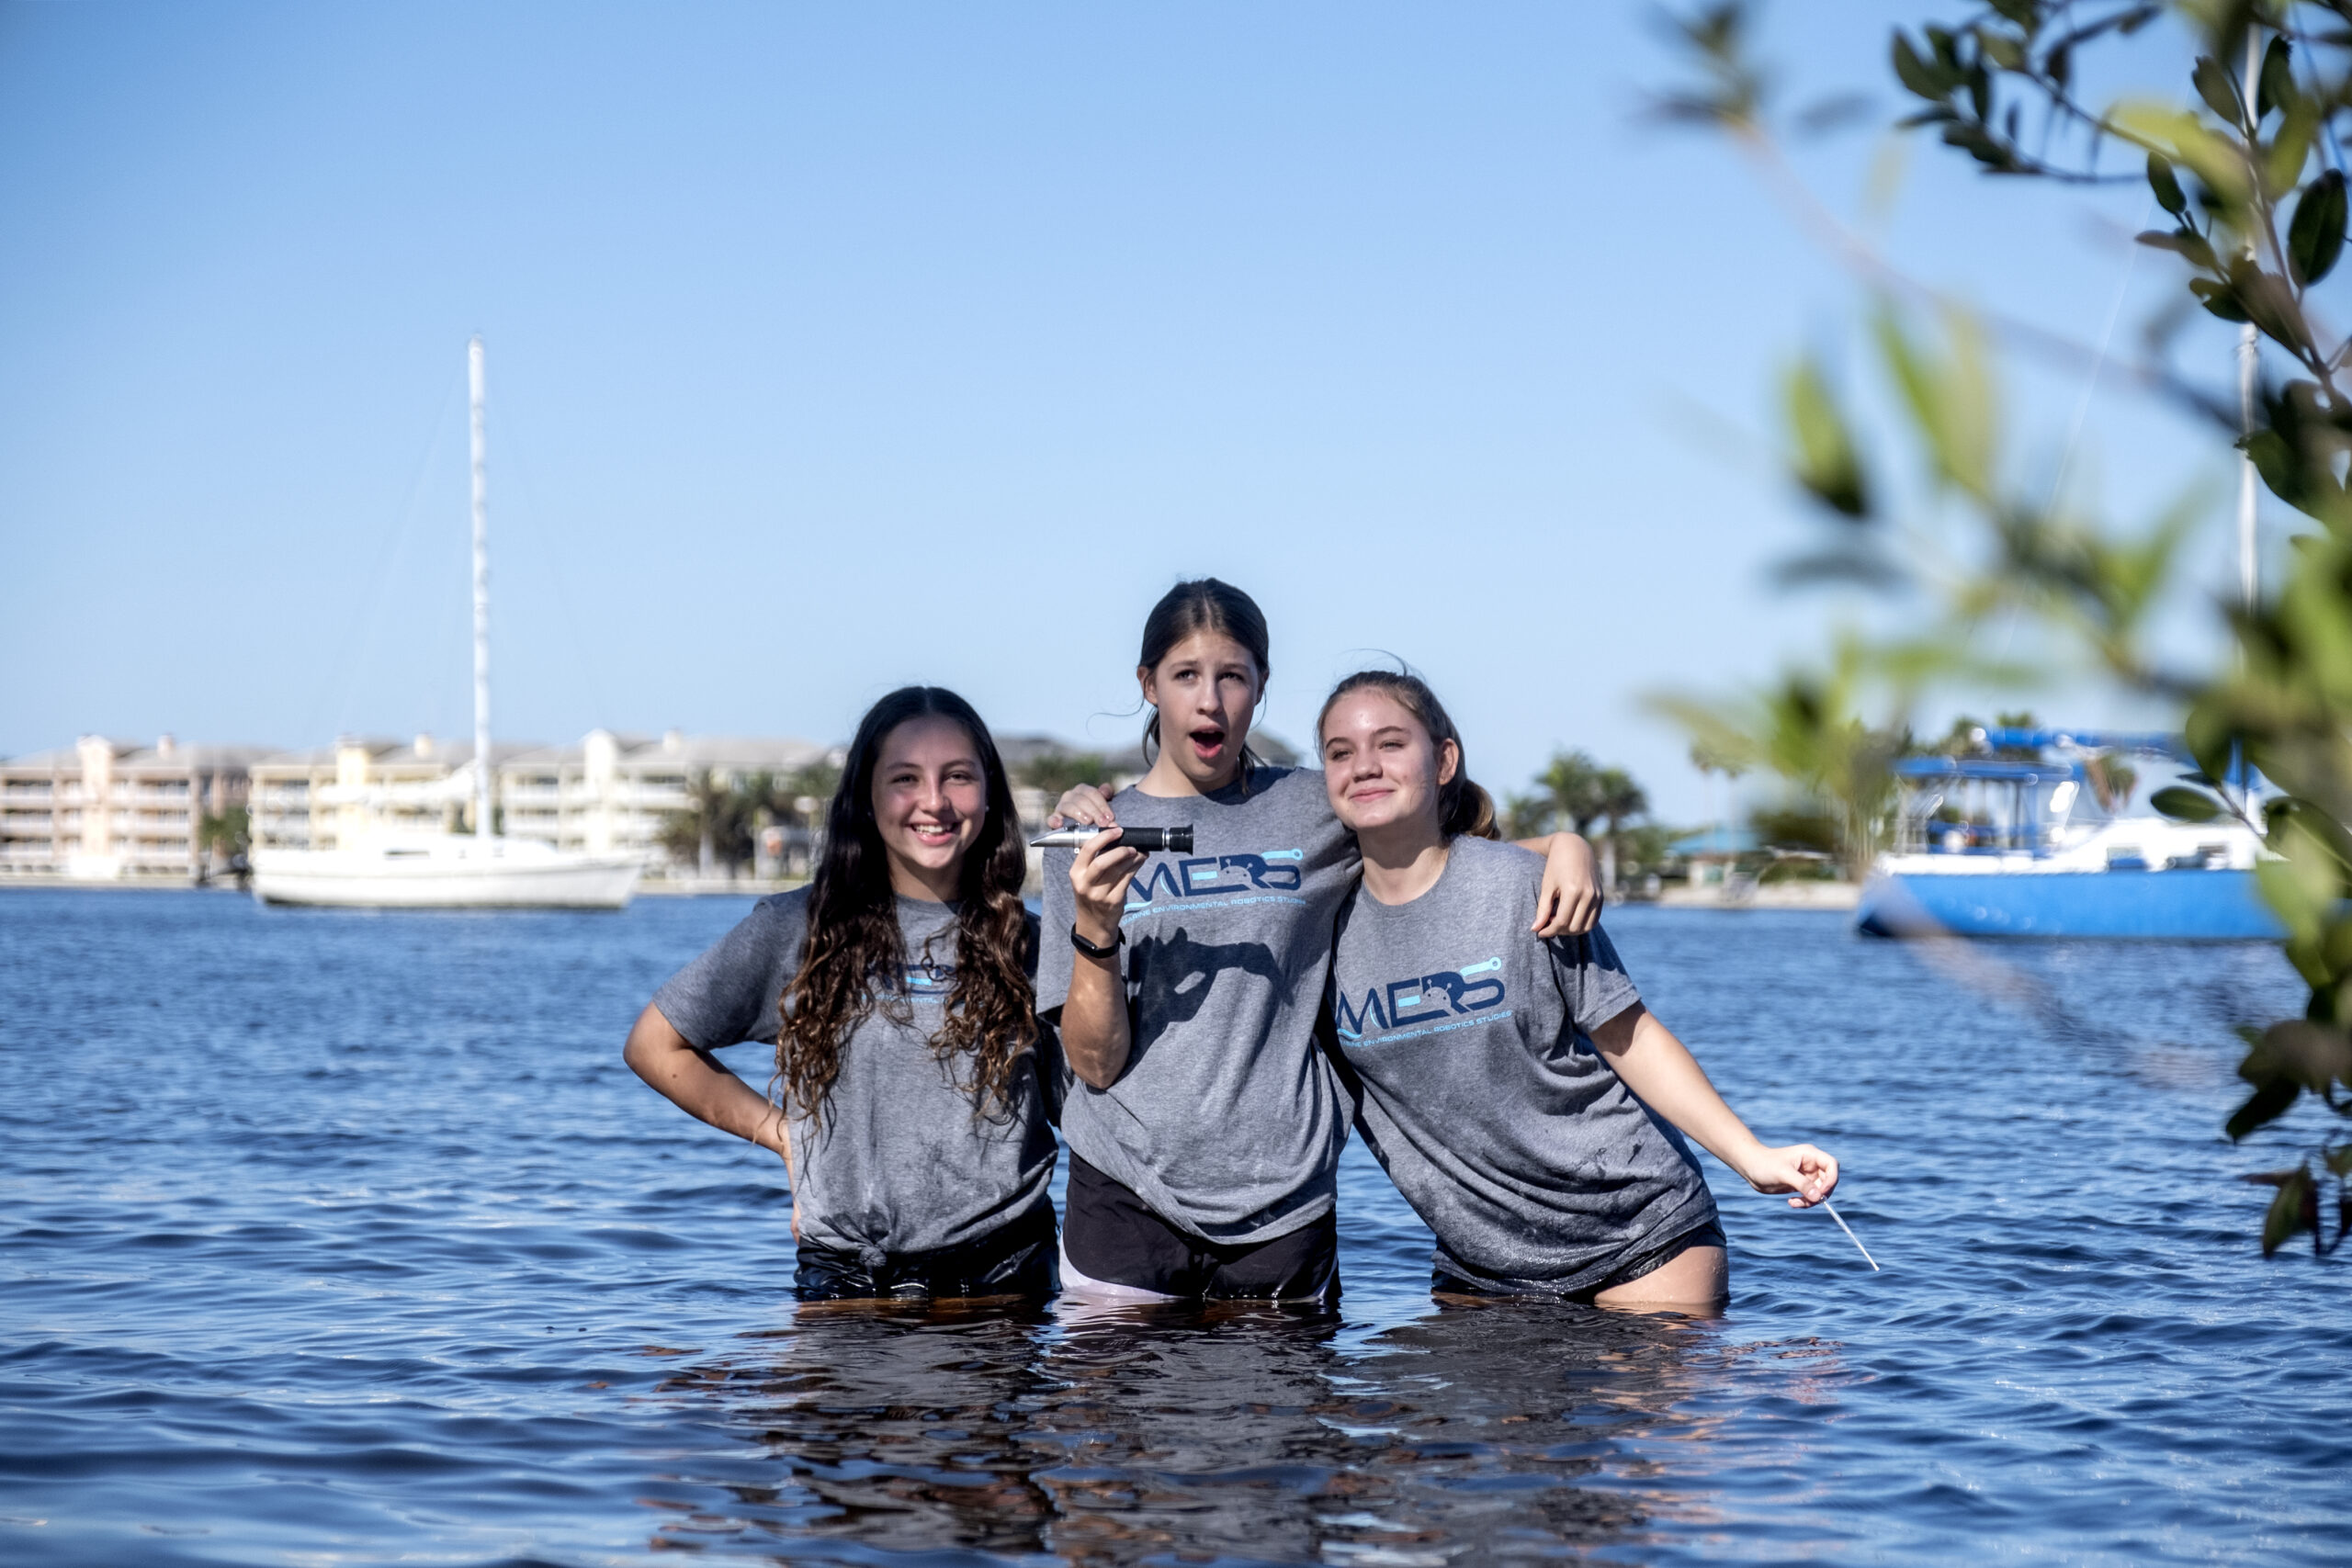 A day in the life of the Indian River Lagoon